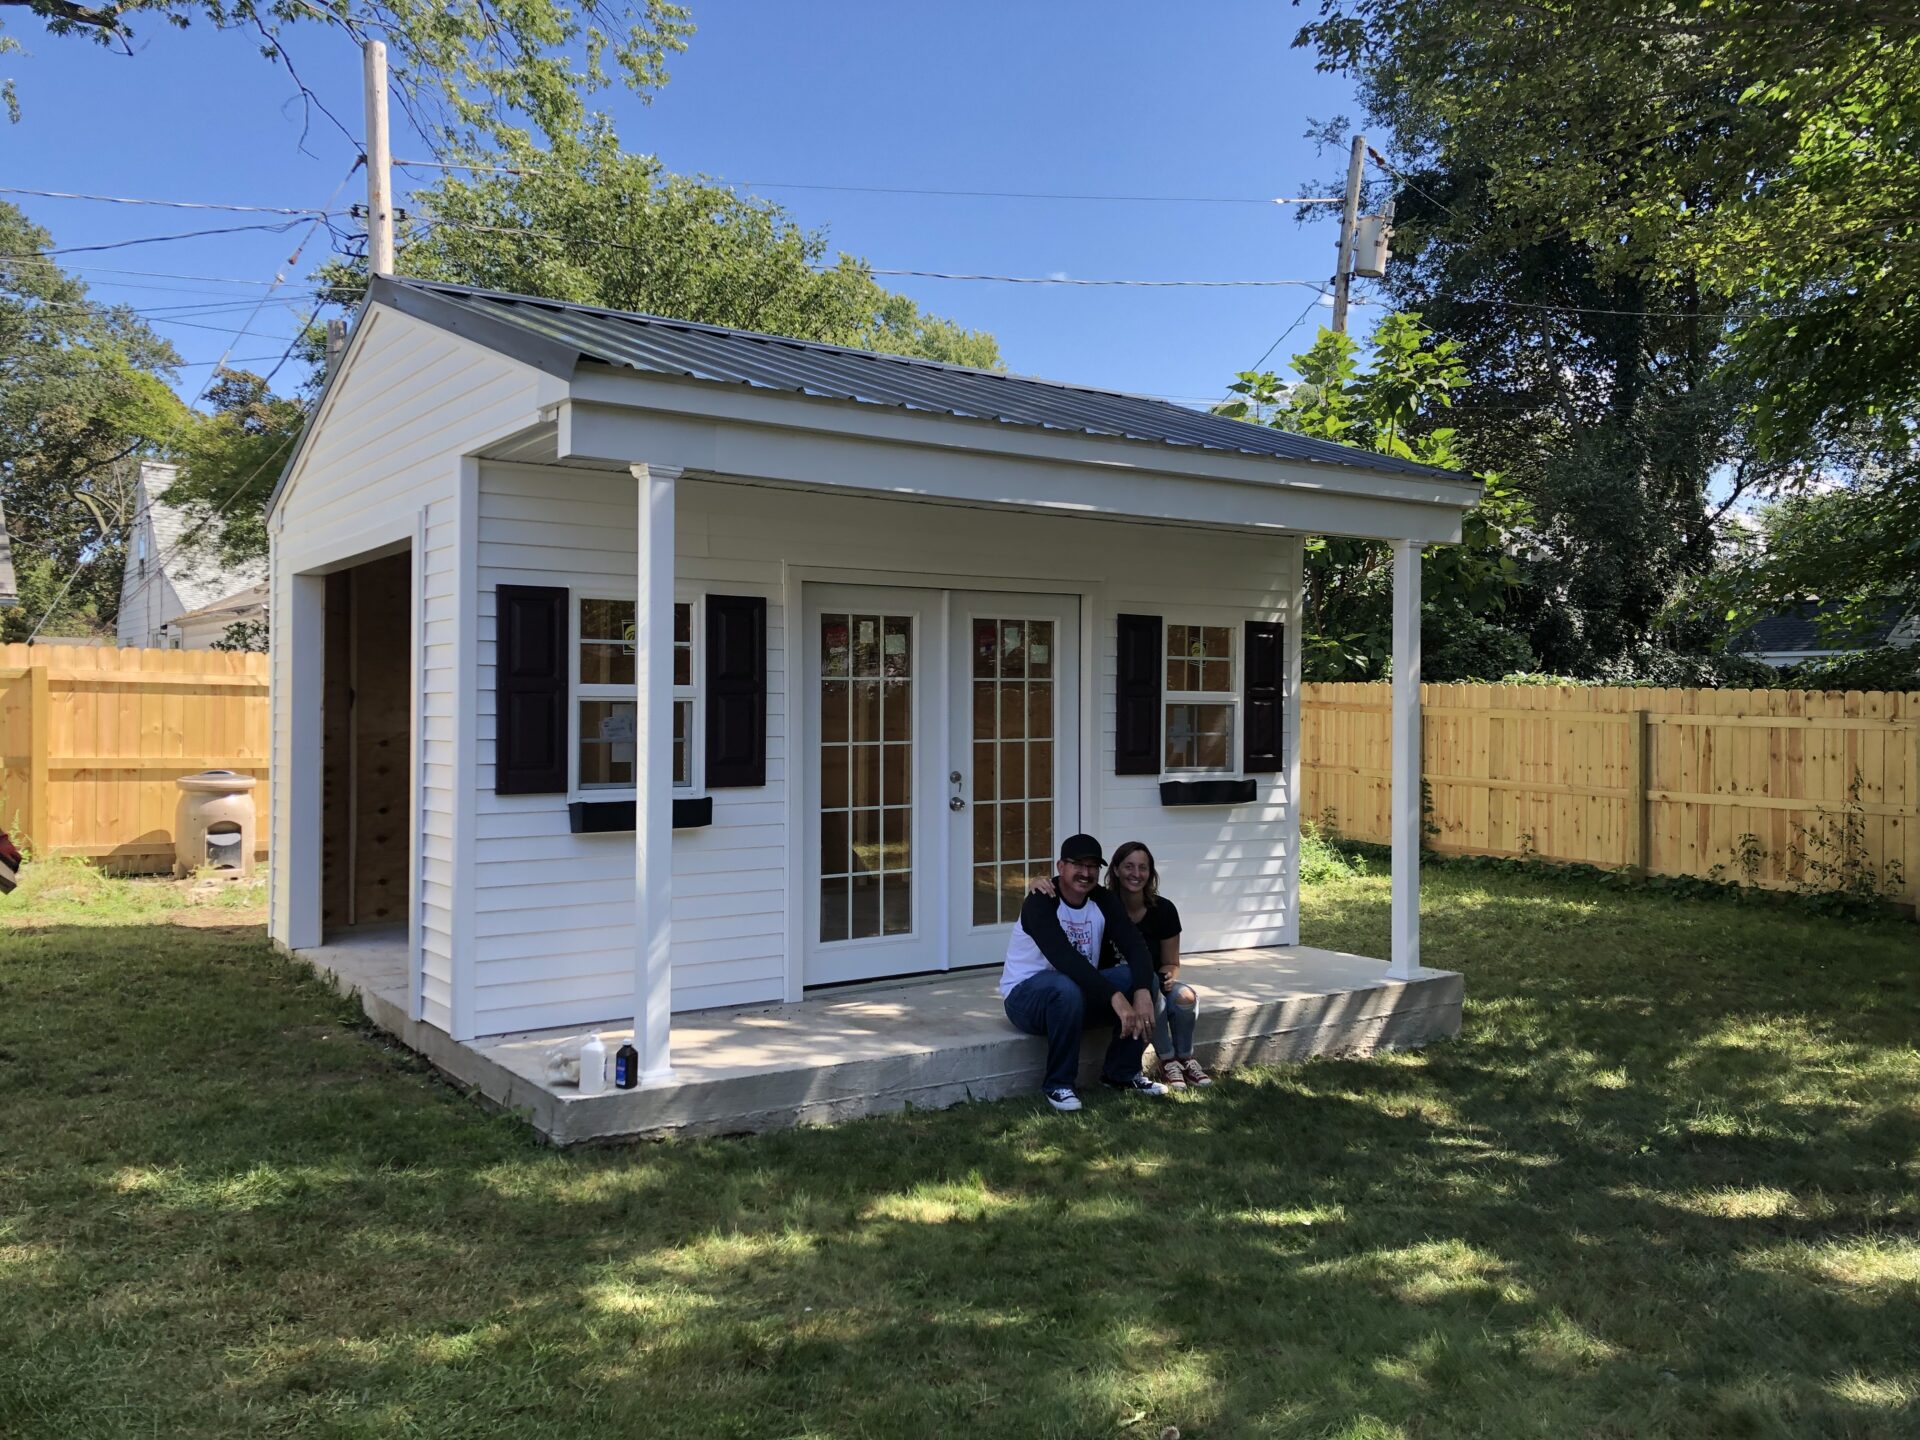 Two people sitting on a bench in front of a white shed.